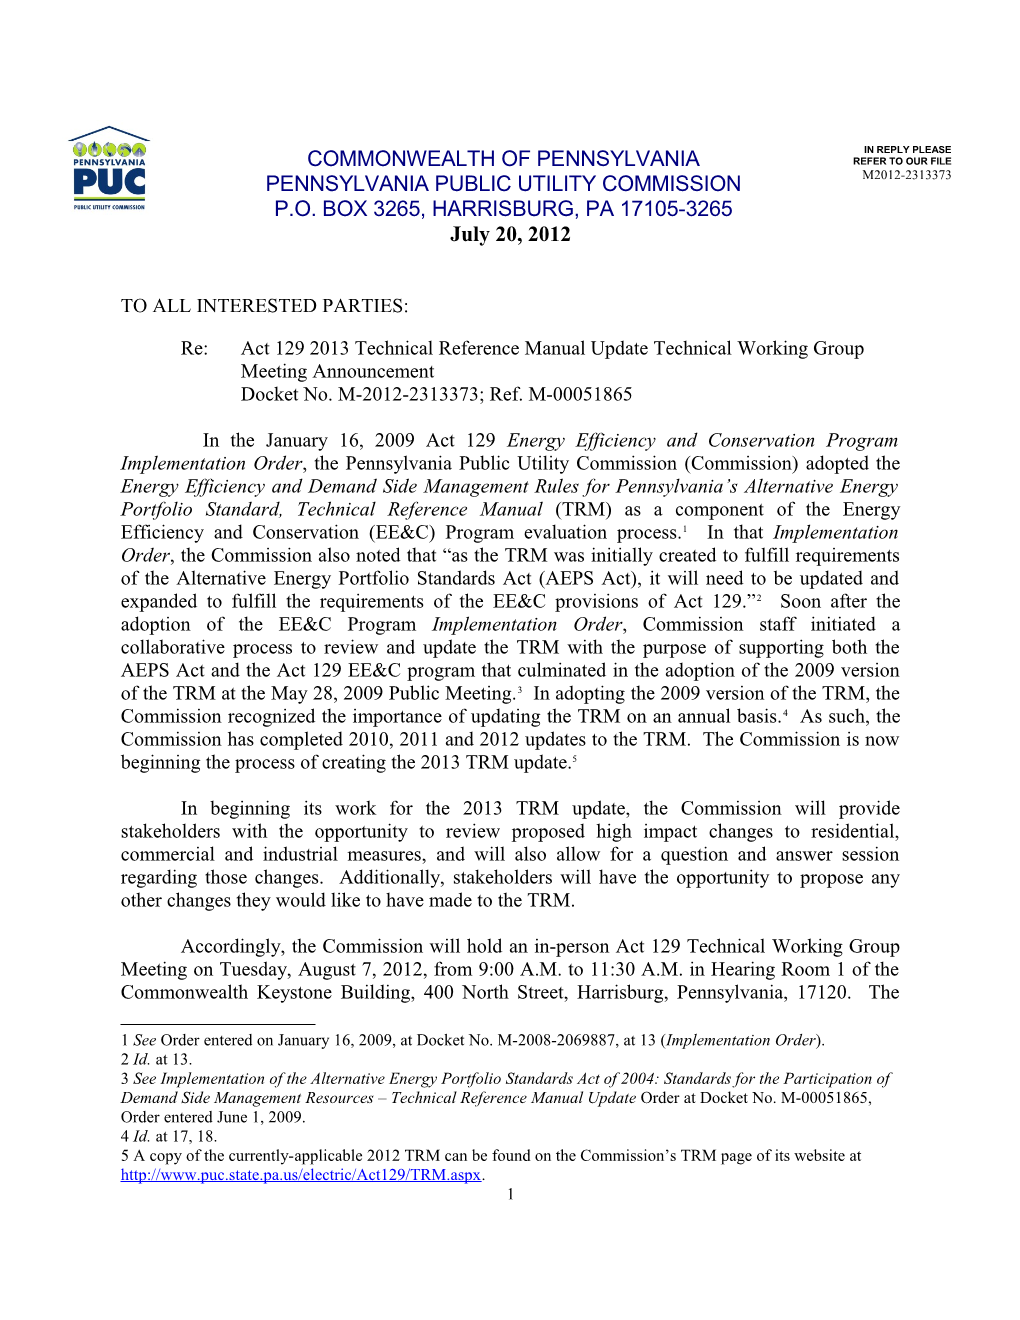 Re:Act 129 2013 Technical Reference Manual Updatetechnical Working Group Meeting Announcement